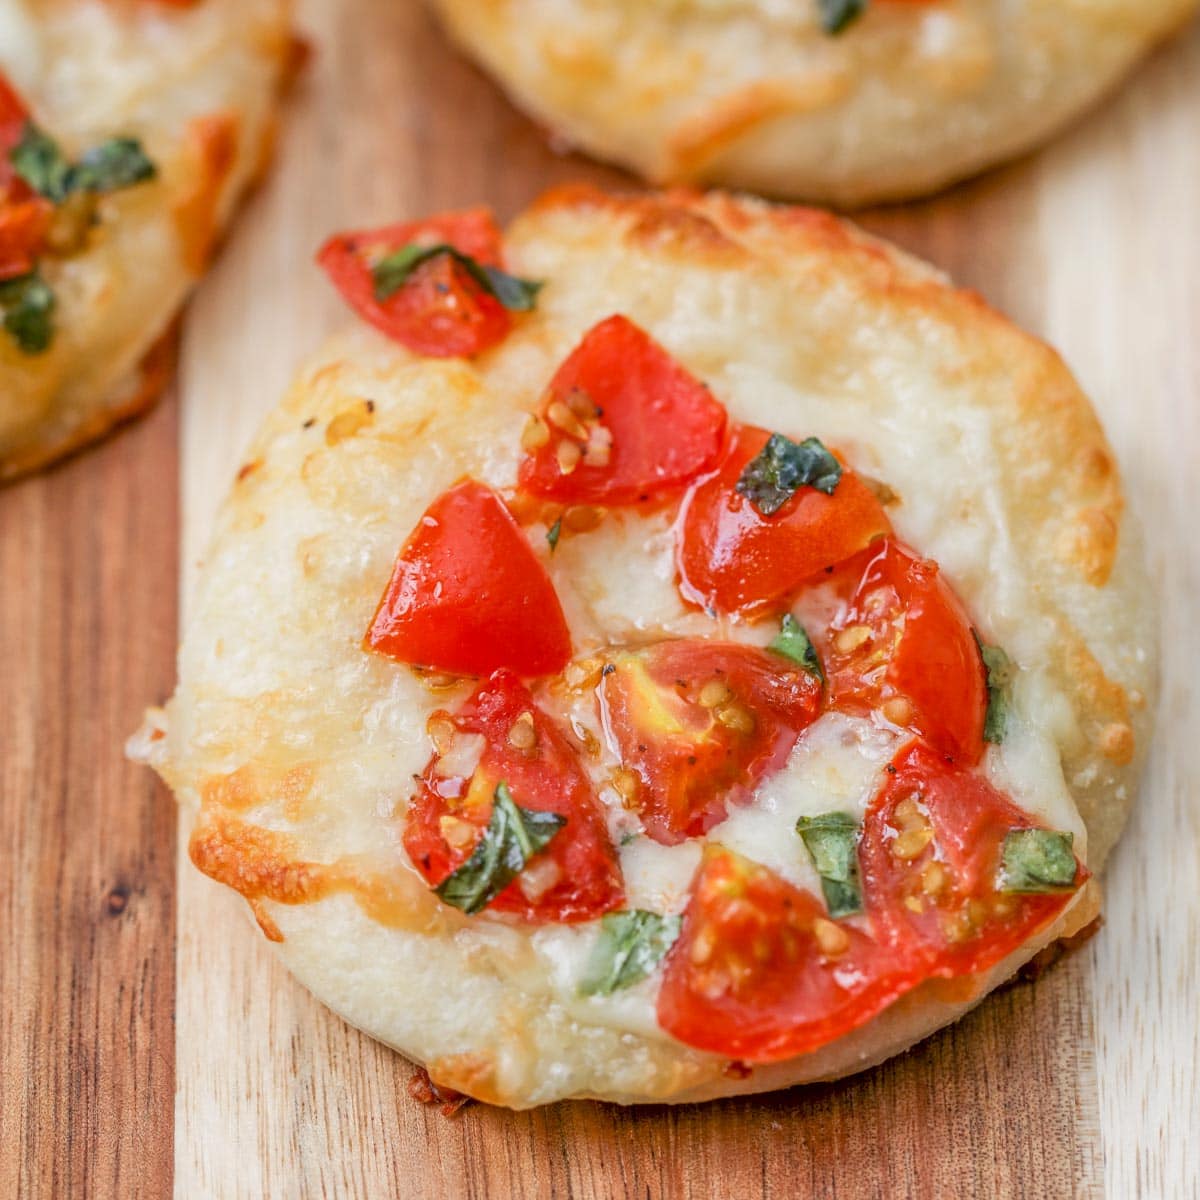 New Year's Eve Appetizers - close up of mini pizzas topped with fresh herbs.